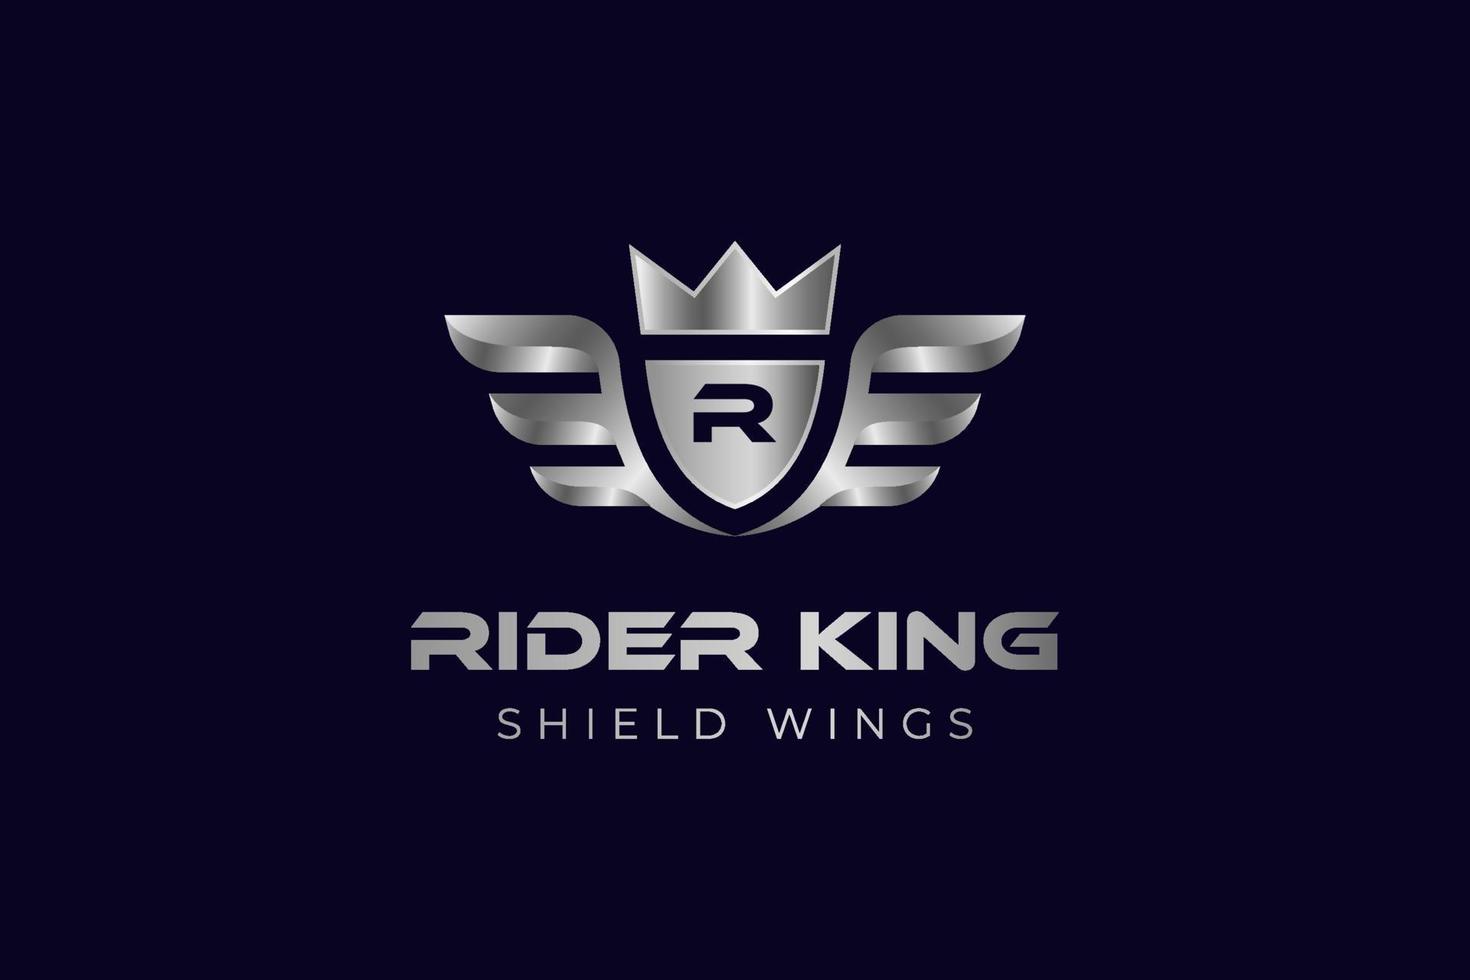 rider king with wing logo emblem for security, club sport motorcycle identity logo design vector